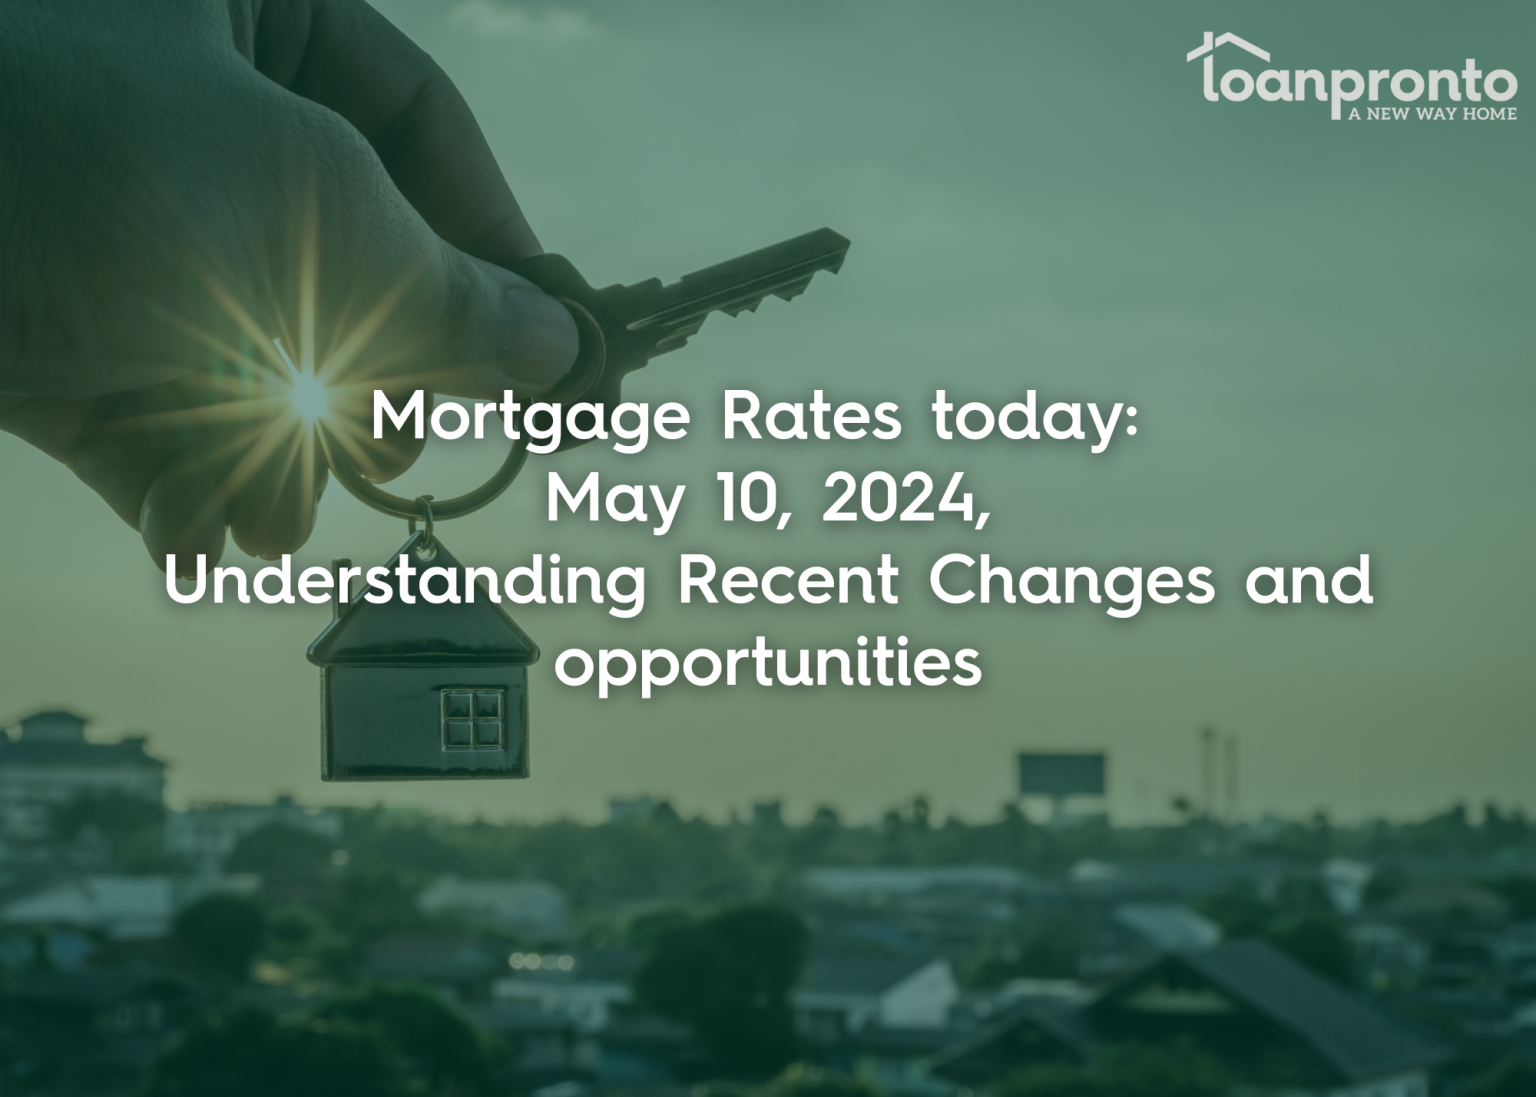 Recent declines in mortgage rates offers opportunities for homebuyers and homeowners